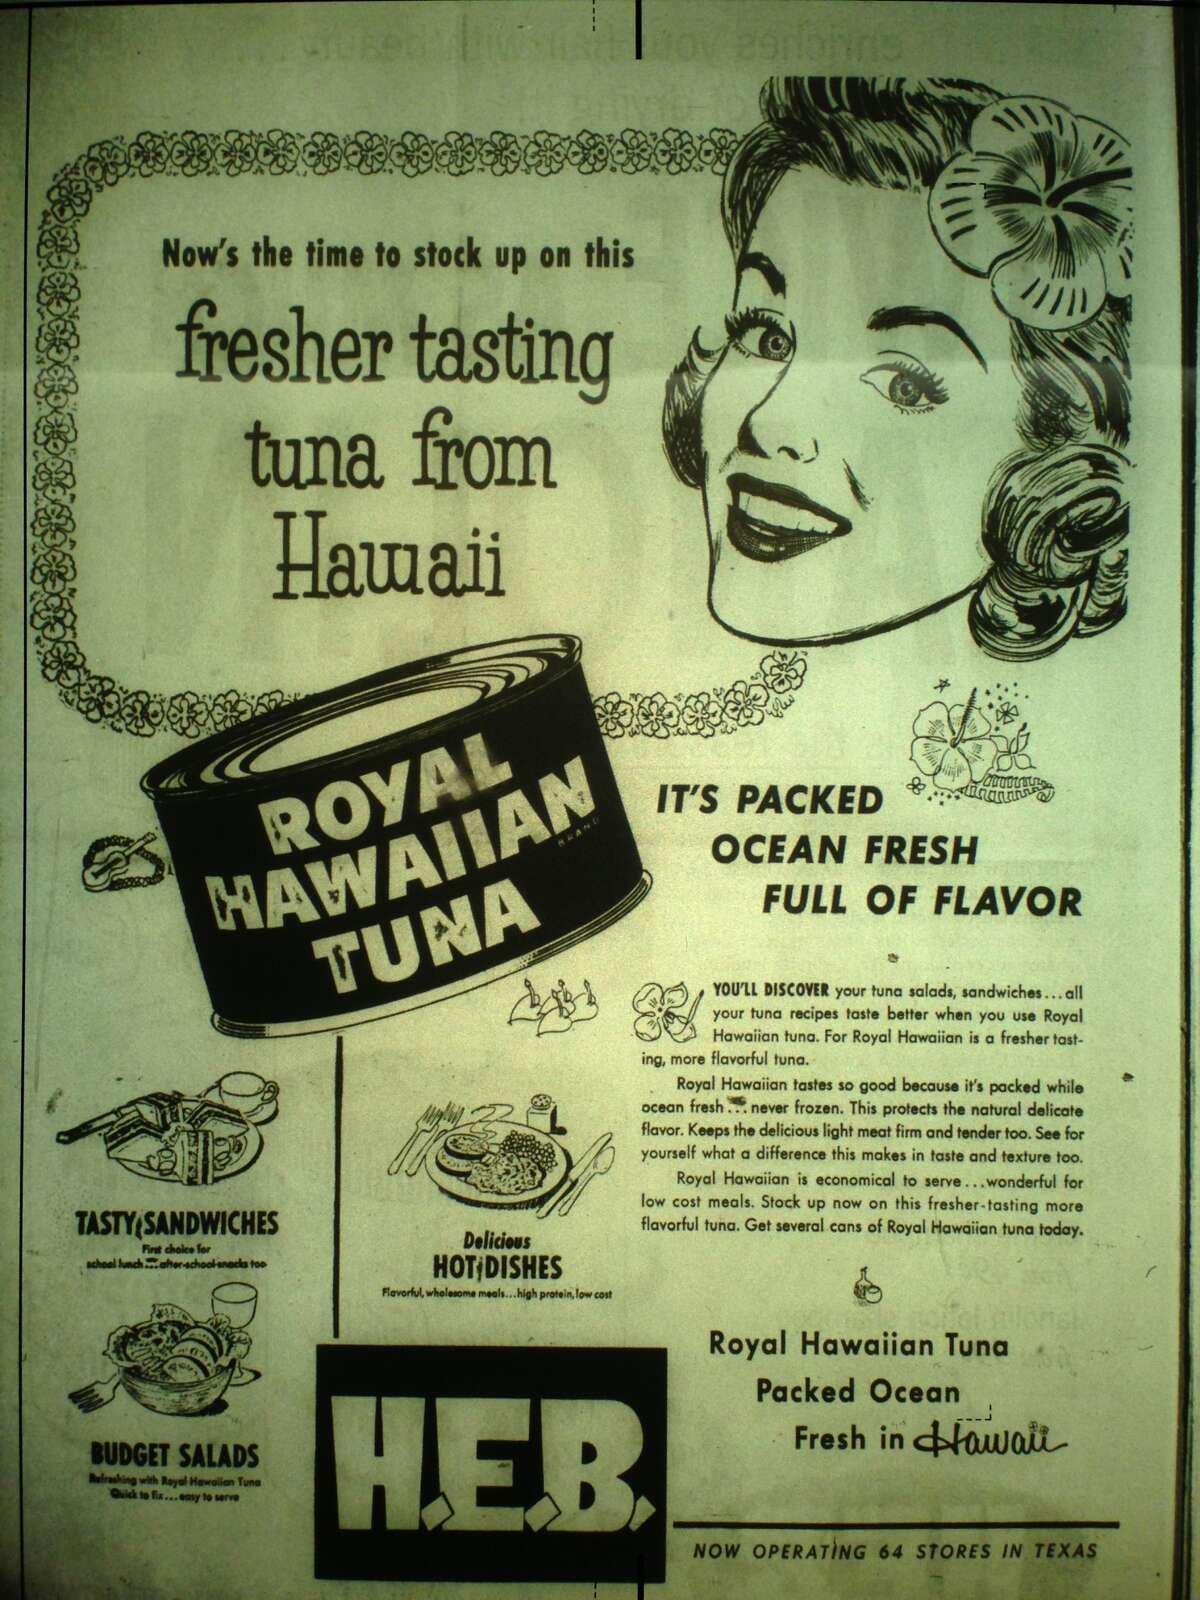 Grocery ads from 1955